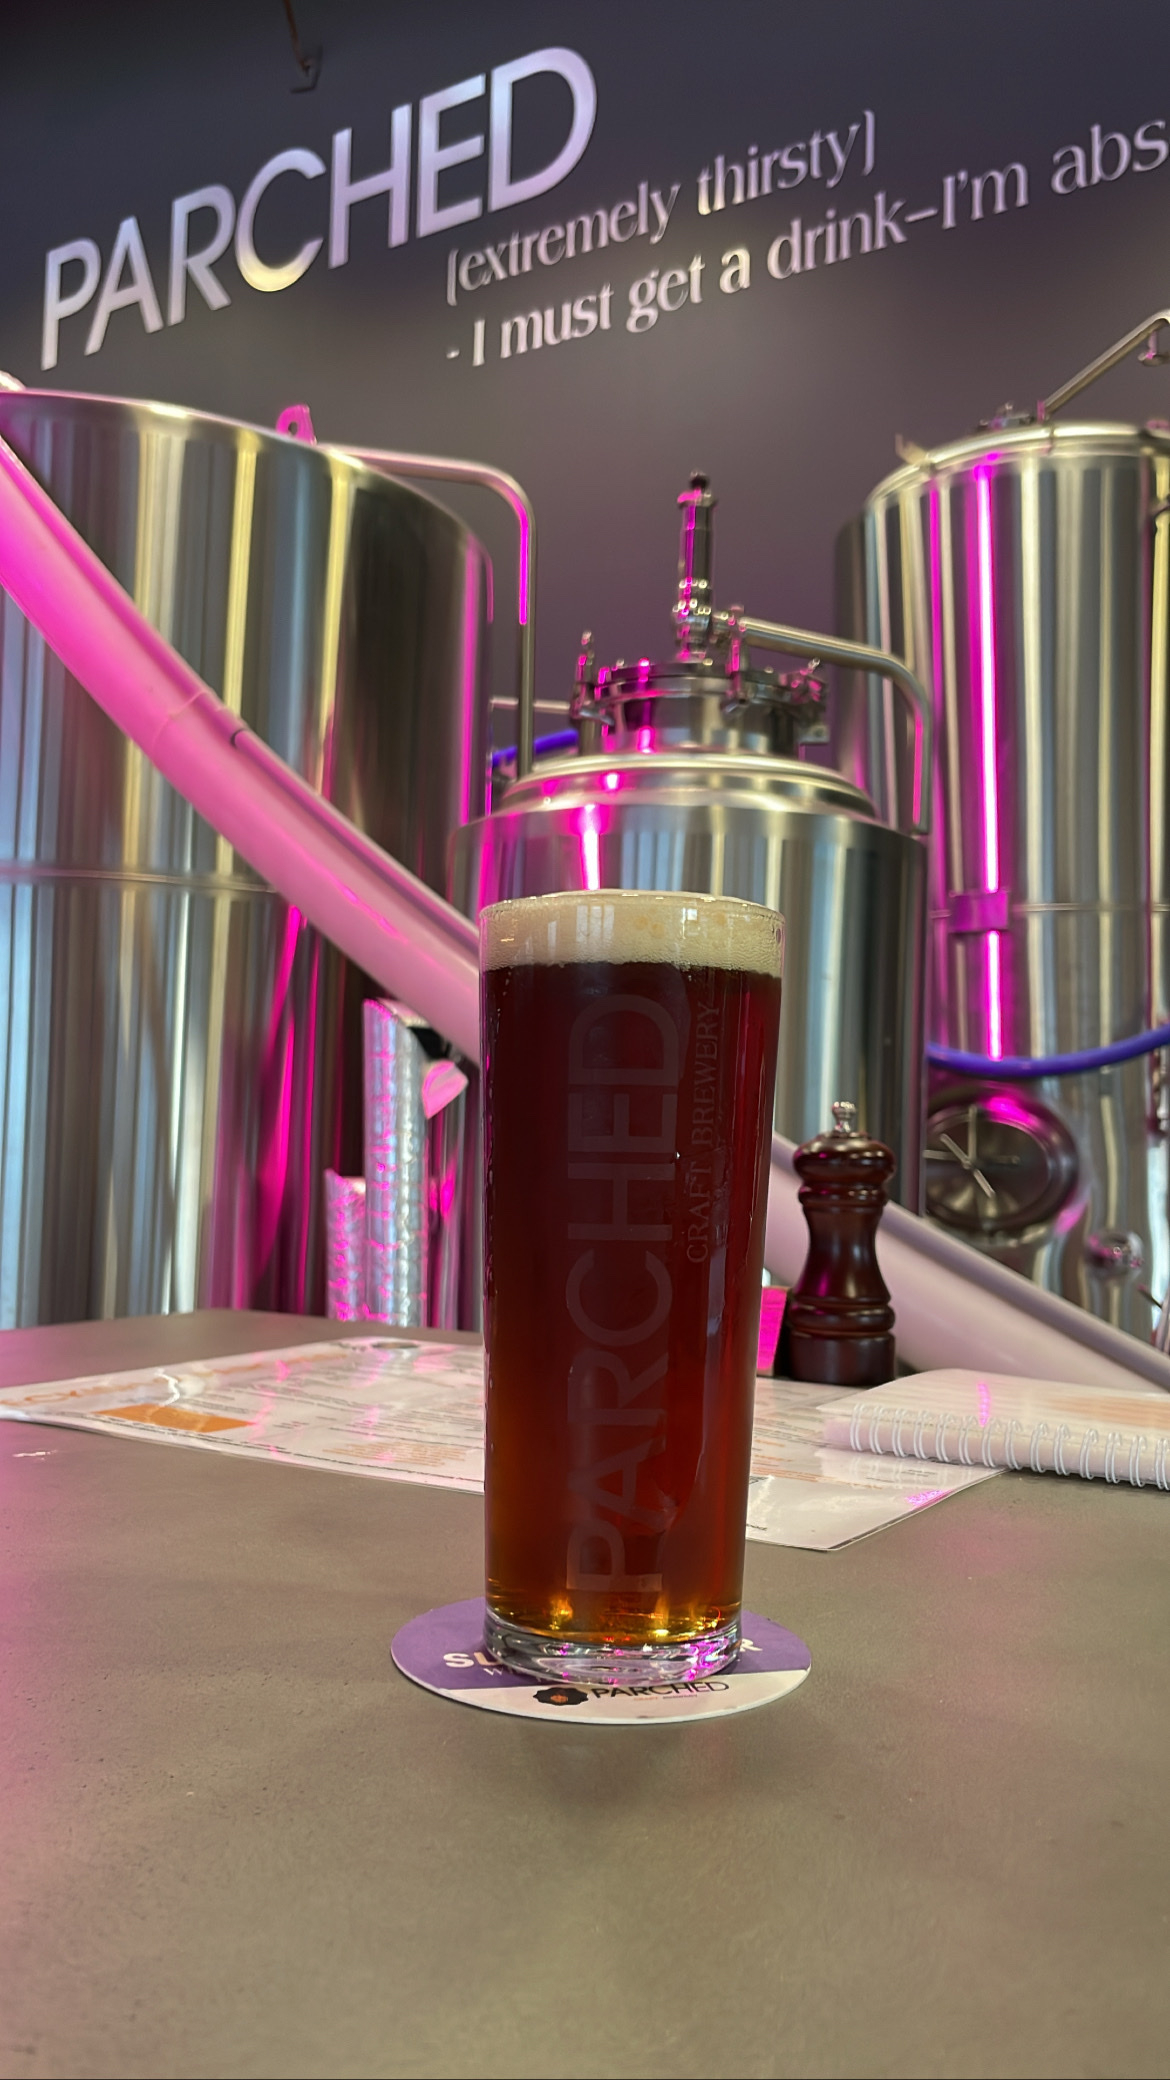 A schooner of beer in front of stainless steel brewing vats. The wall in the background says PARCHED (extremely thirsty).